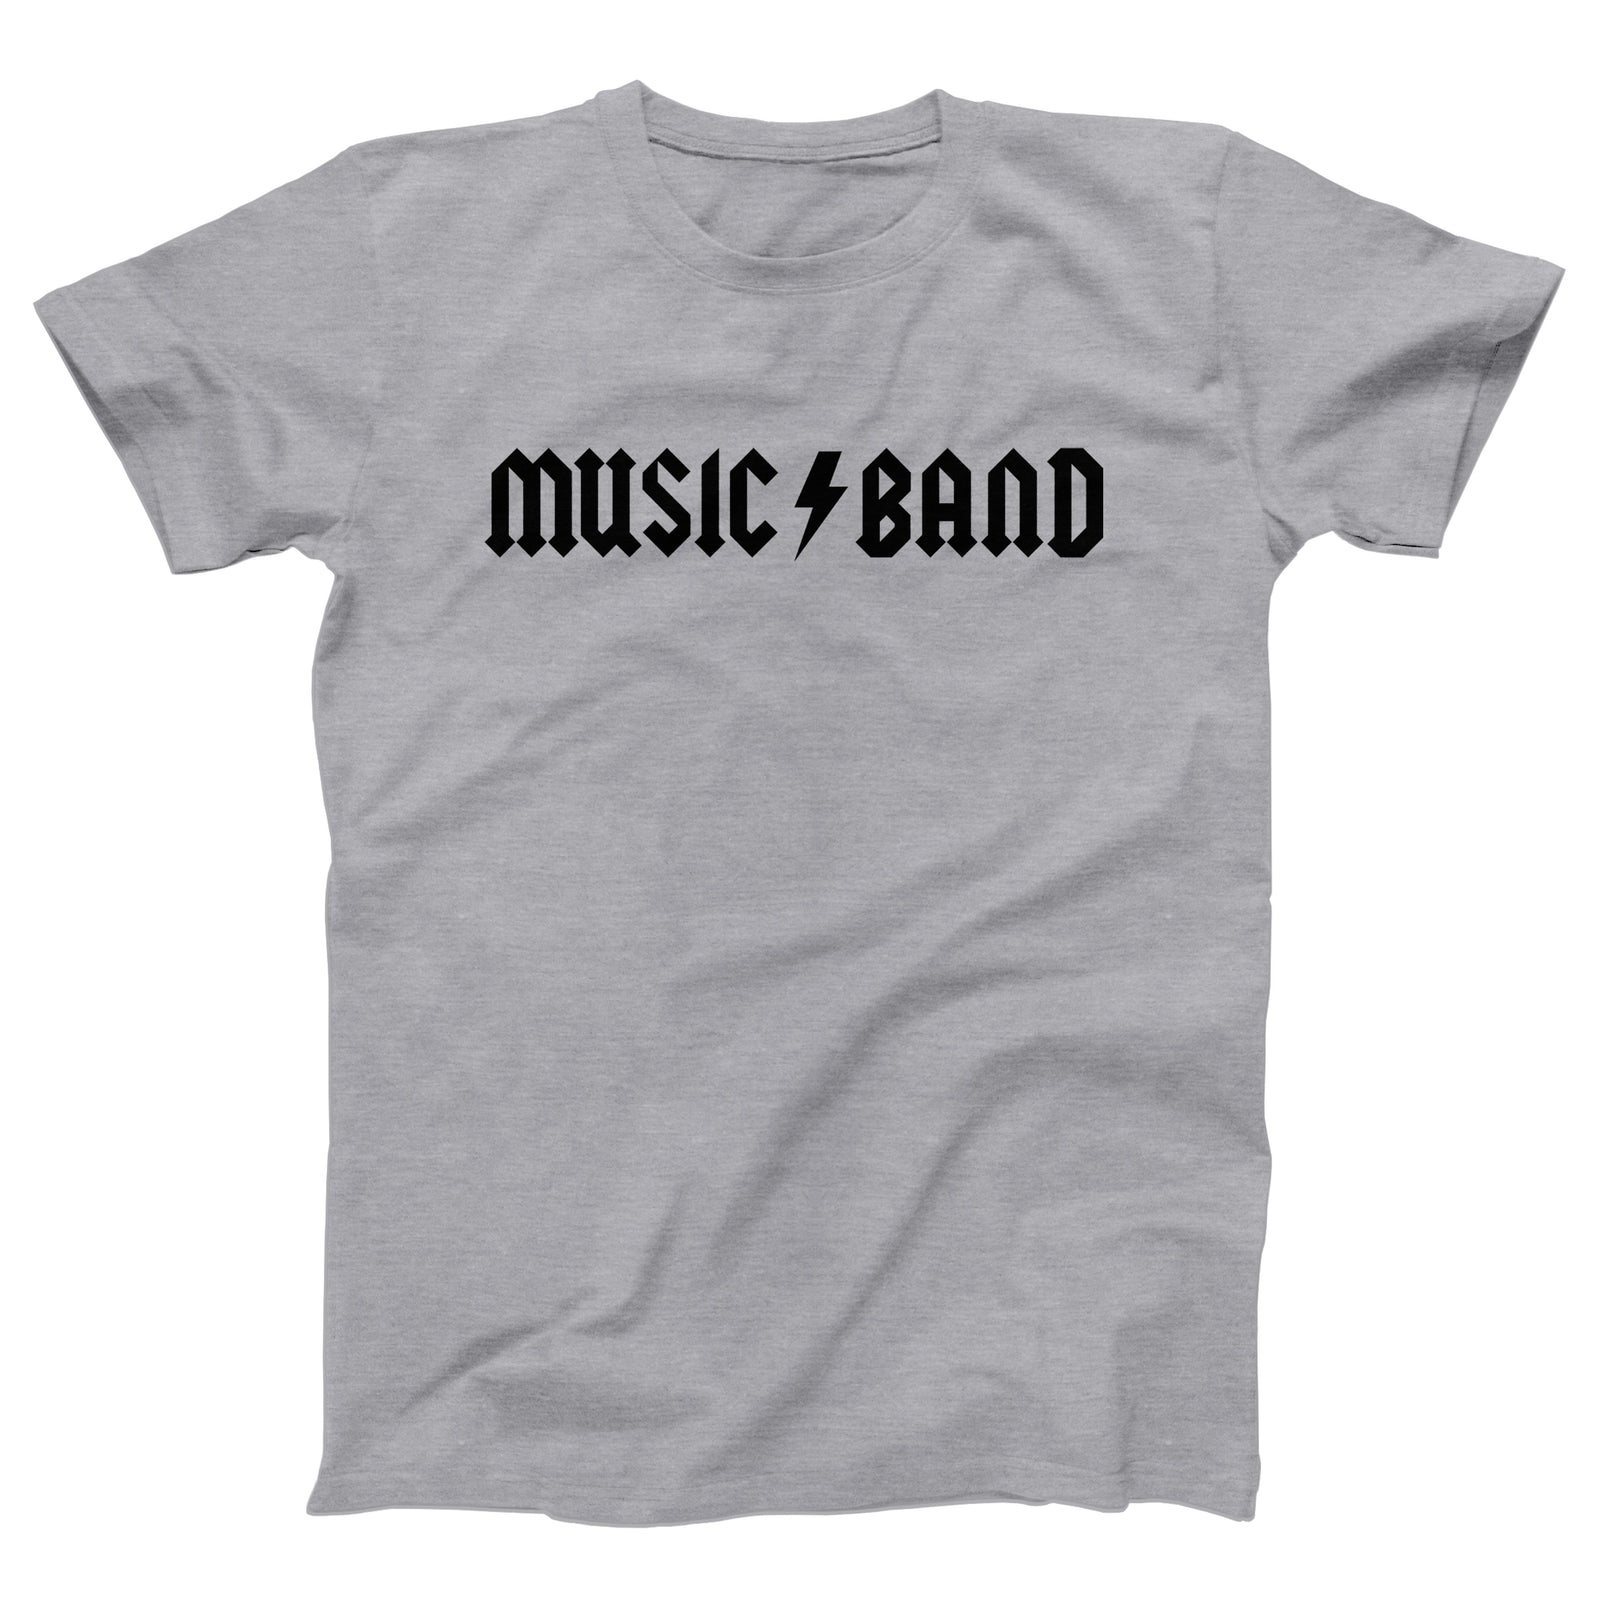 //cdn.shopify.com/s/files/1/0274/2488/2766/products/music-band-menunisex-t-shirt-446954_5000x.jpg?v=1625398492 5000w,
    //cdn.shopify.com/s/files/1/0274/2488/2766/products/music-band-menunisex-t-shirt-446954_4500x.jpg?v=1625398492 4500w,
    //cdn.shopify.com/s/files/1/0274/2488/2766/products/music-band-menunisex-t-shirt-446954_4000x.jpg?v=1625398492 4000w,
    //cdn.shopify.com/s/files/1/0274/2488/2766/products/music-band-menunisex-t-shirt-446954_3500x.jpg?v=1625398492 3500w,
    //cdn.shopify.com/s/files/1/0274/2488/2766/products/music-band-menunisex-t-shirt-446954_3000x.jpg?v=1625398492 3000w,
    //cdn.shopify.com/s/files/1/0274/2488/2766/products/music-band-menunisex-t-shirt-446954_2500x.jpg?v=1625398492 2500w,
    //cdn.shopify.com/s/files/1/0274/2488/2766/products/music-band-menunisex-t-shirt-446954_2000x.jpg?v=1625398492 2000w,
    //cdn.shopify.com/s/files/1/0274/2488/2766/products/music-band-menunisex-t-shirt-446954_1800x.jpg?v=1625398492 1800w,
    //cdn.shopify.com/s/files/1/0274/2488/2766/products/music-band-menunisex-t-shirt-446954_1600x.jpg?v=1625398492 1600w,
    //cdn.shopify.com/s/files/1/0274/2488/2766/products/music-band-menunisex-t-shirt-446954_1400x.jpg?v=1625398492 1400w,
    //cdn.shopify.com/s/files/1/0274/2488/2766/products/music-band-menunisex-t-shirt-446954_1200x.jpg?v=1625398492 1200w,
    //cdn.shopify.com/s/files/1/0274/2488/2766/products/music-band-menunisex-t-shirt-446954_1000x.jpg?v=1625398492 1000w,
    //cdn.shopify.com/s/files/1/0274/2488/2766/products/music-band-menunisex-t-shirt-446954_800x.jpg?v=1625398492 800w,
    //cdn.shopify.com/s/files/1/0274/2488/2766/products/music-band-menunisex-t-shirt-446954_600x.jpg?v=1625398492 600w,
    //cdn.shopify.com/s/files/1/0274/2488/2766/products/music-band-menunisex-t-shirt-446954_400x.jpg?v=1625398492 400w,
    //cdn.shopify.com/s/files/1/0274/2488/2766/products/music-band-menunisex-t-shirt-446954_200x.jpg?v=1625398492 200w